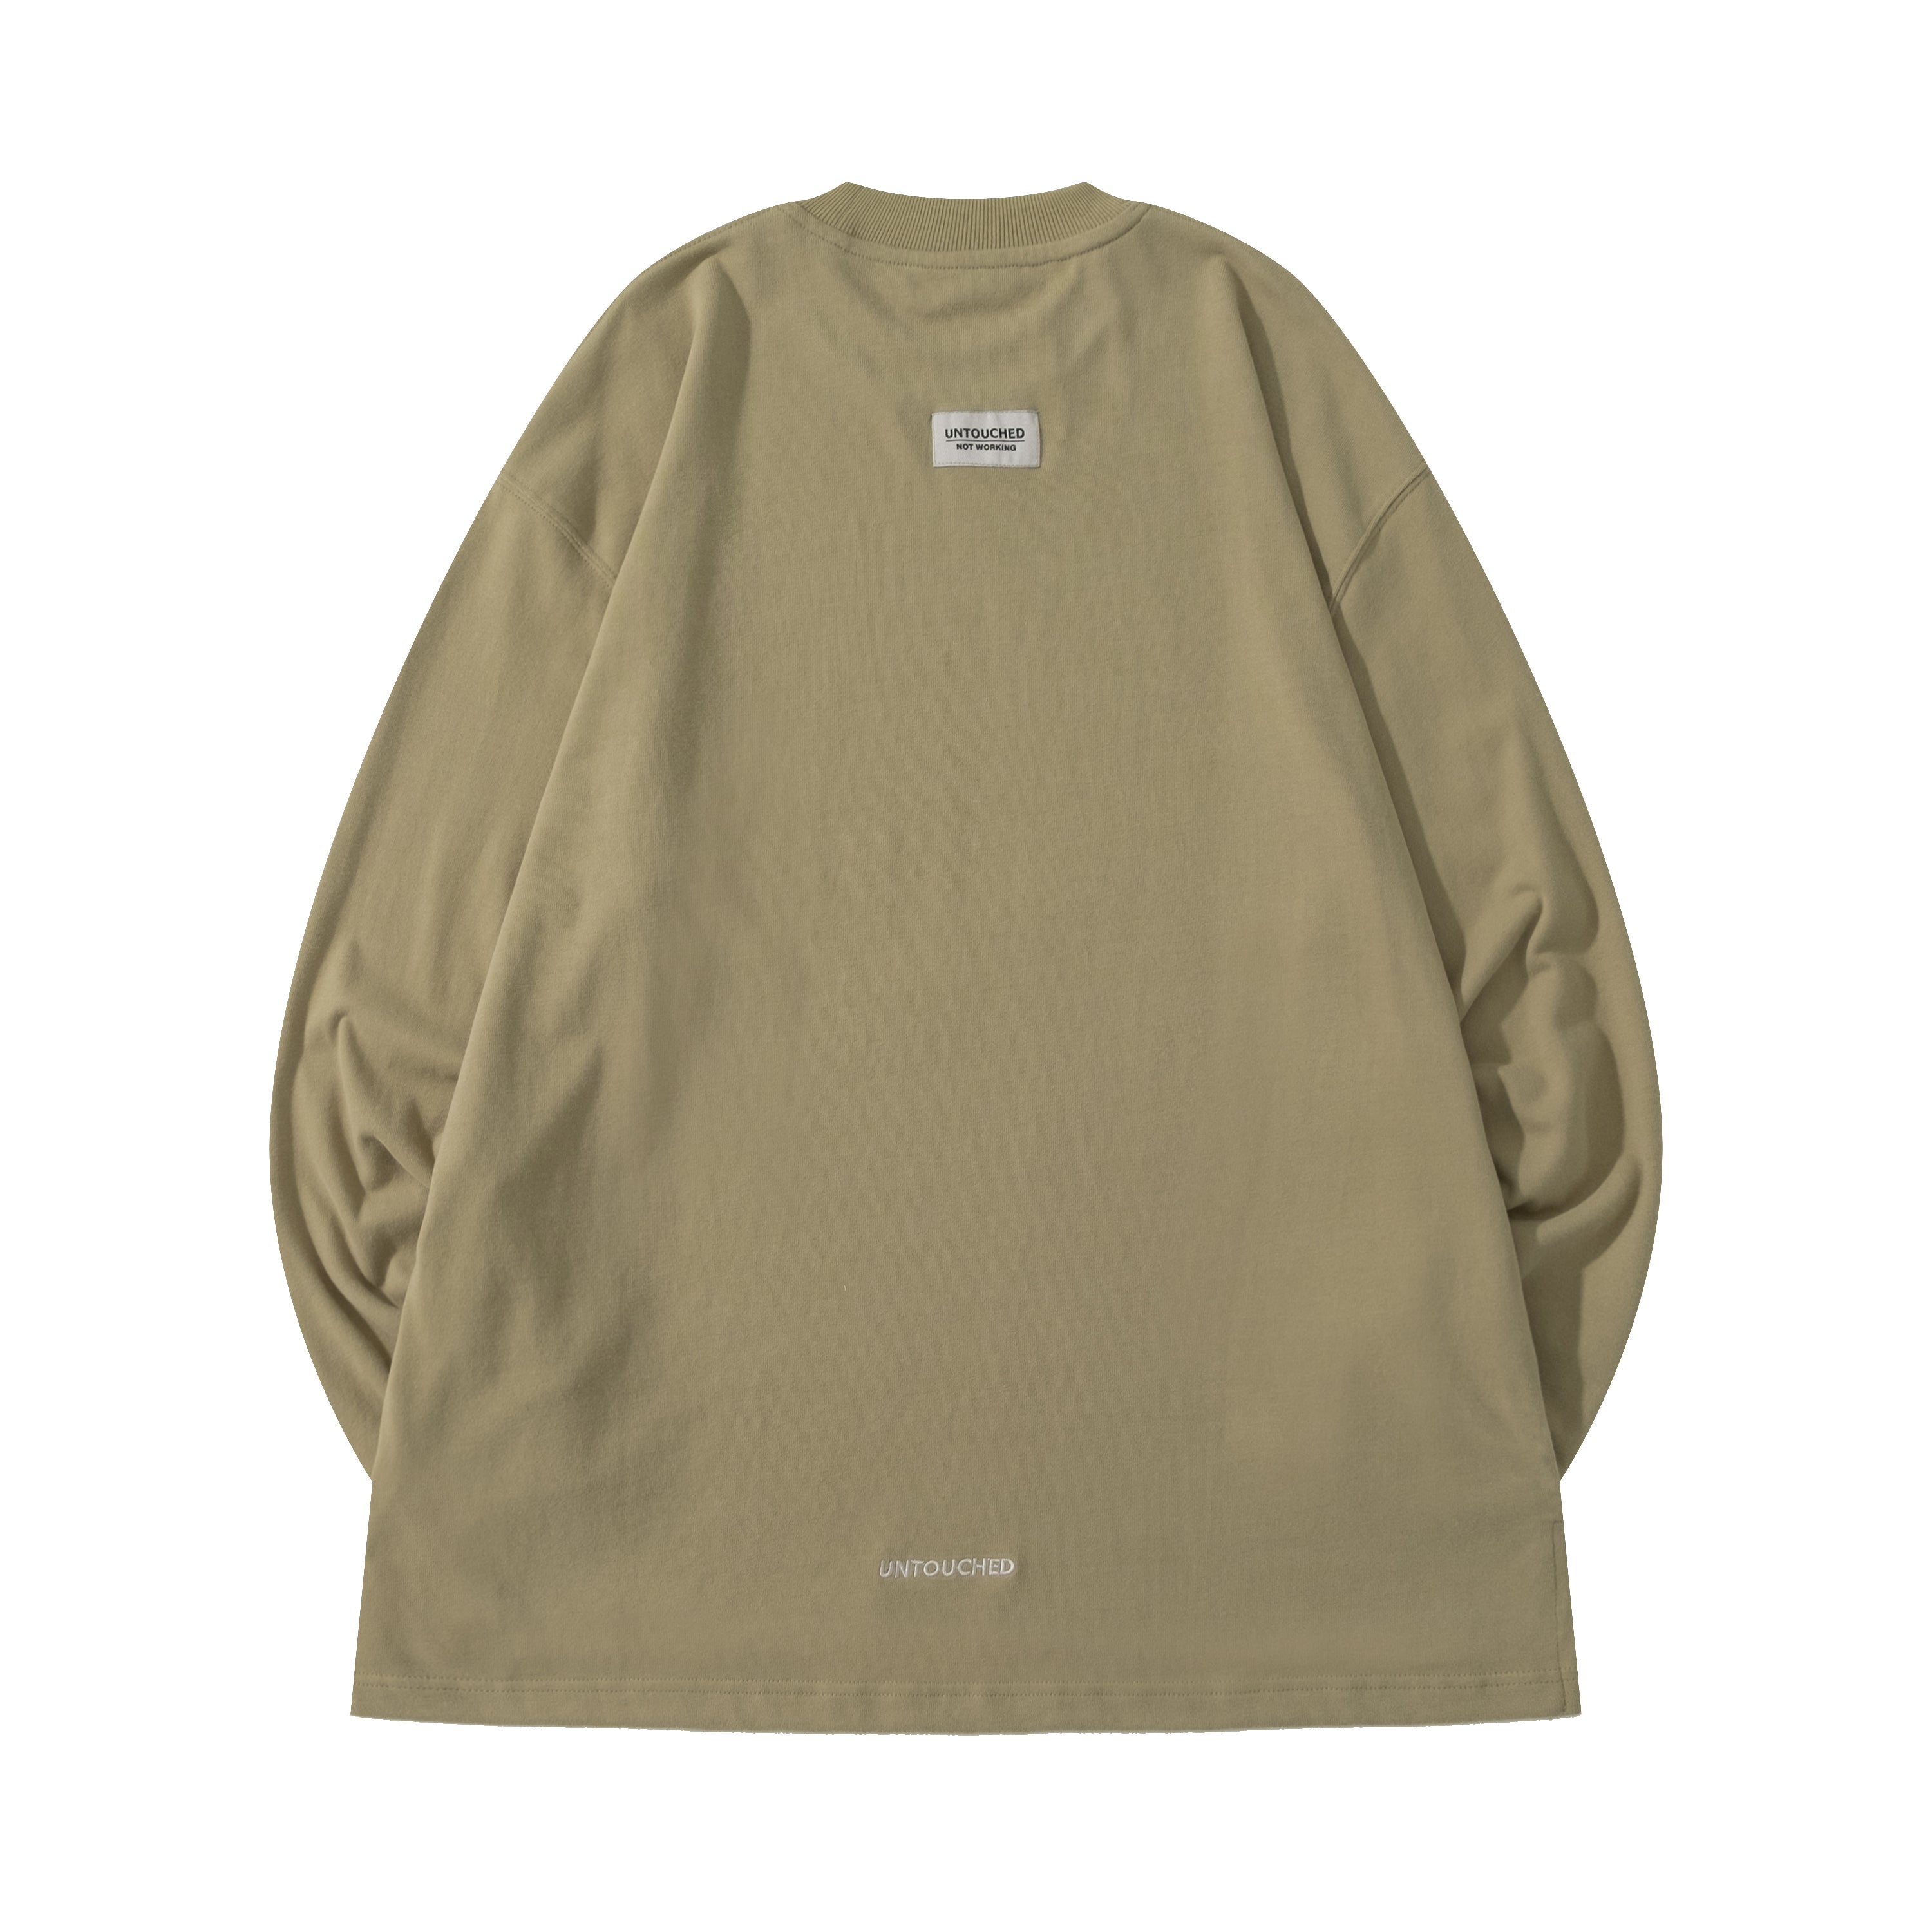 NW213GN | ABCDEFUCKOFF LONG TEE | NOT WORKING IV